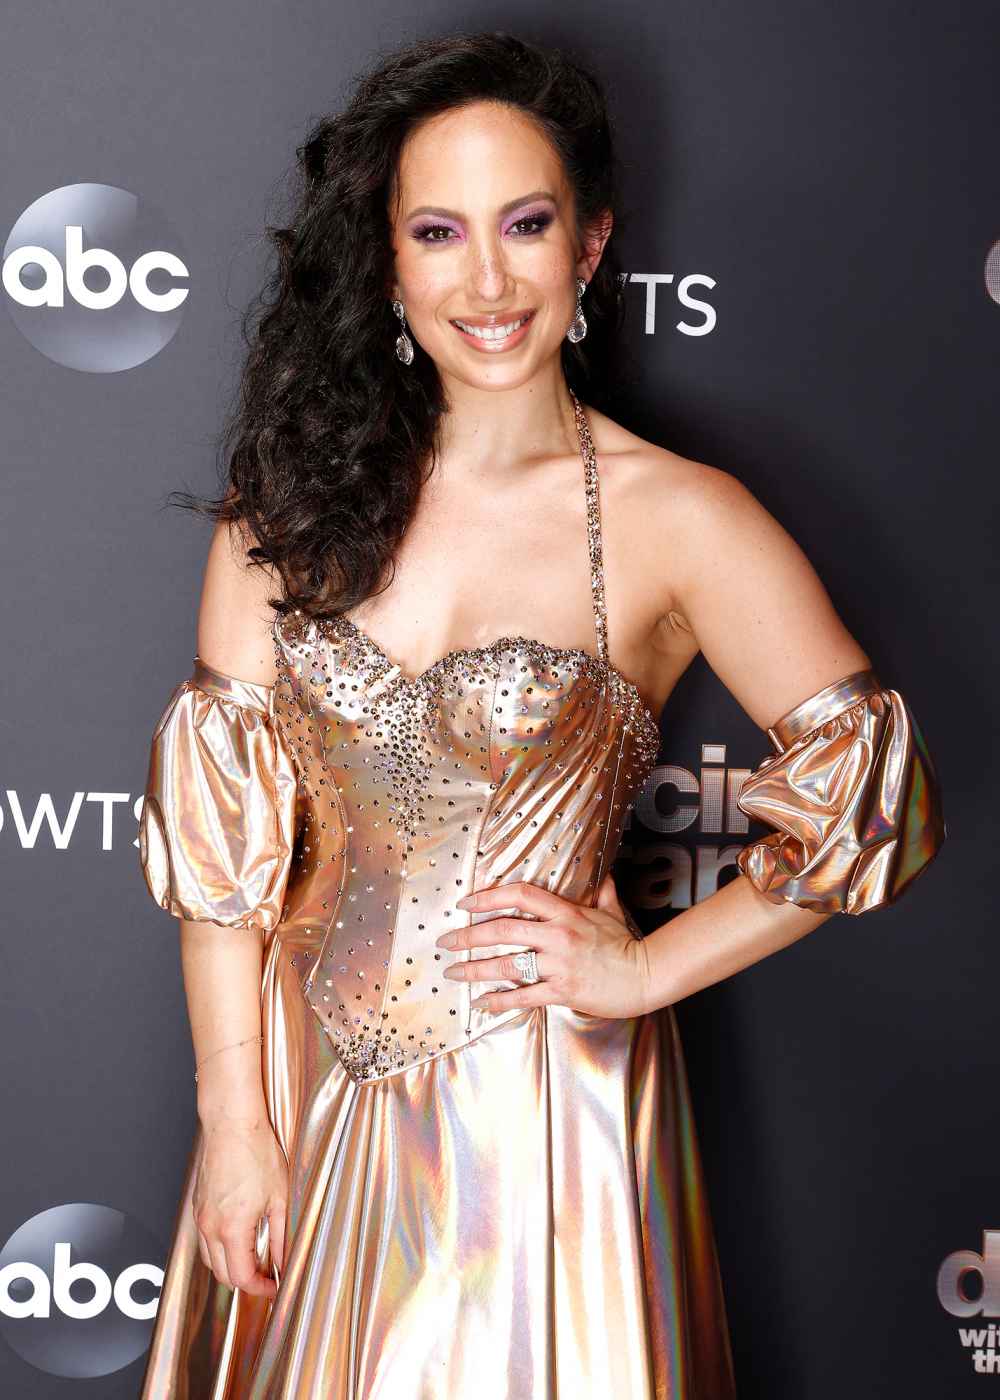 Dancing With the Stars' Cheryl Burke Hints at Retirement: 'It's Time to Hang Up Those Shoes'